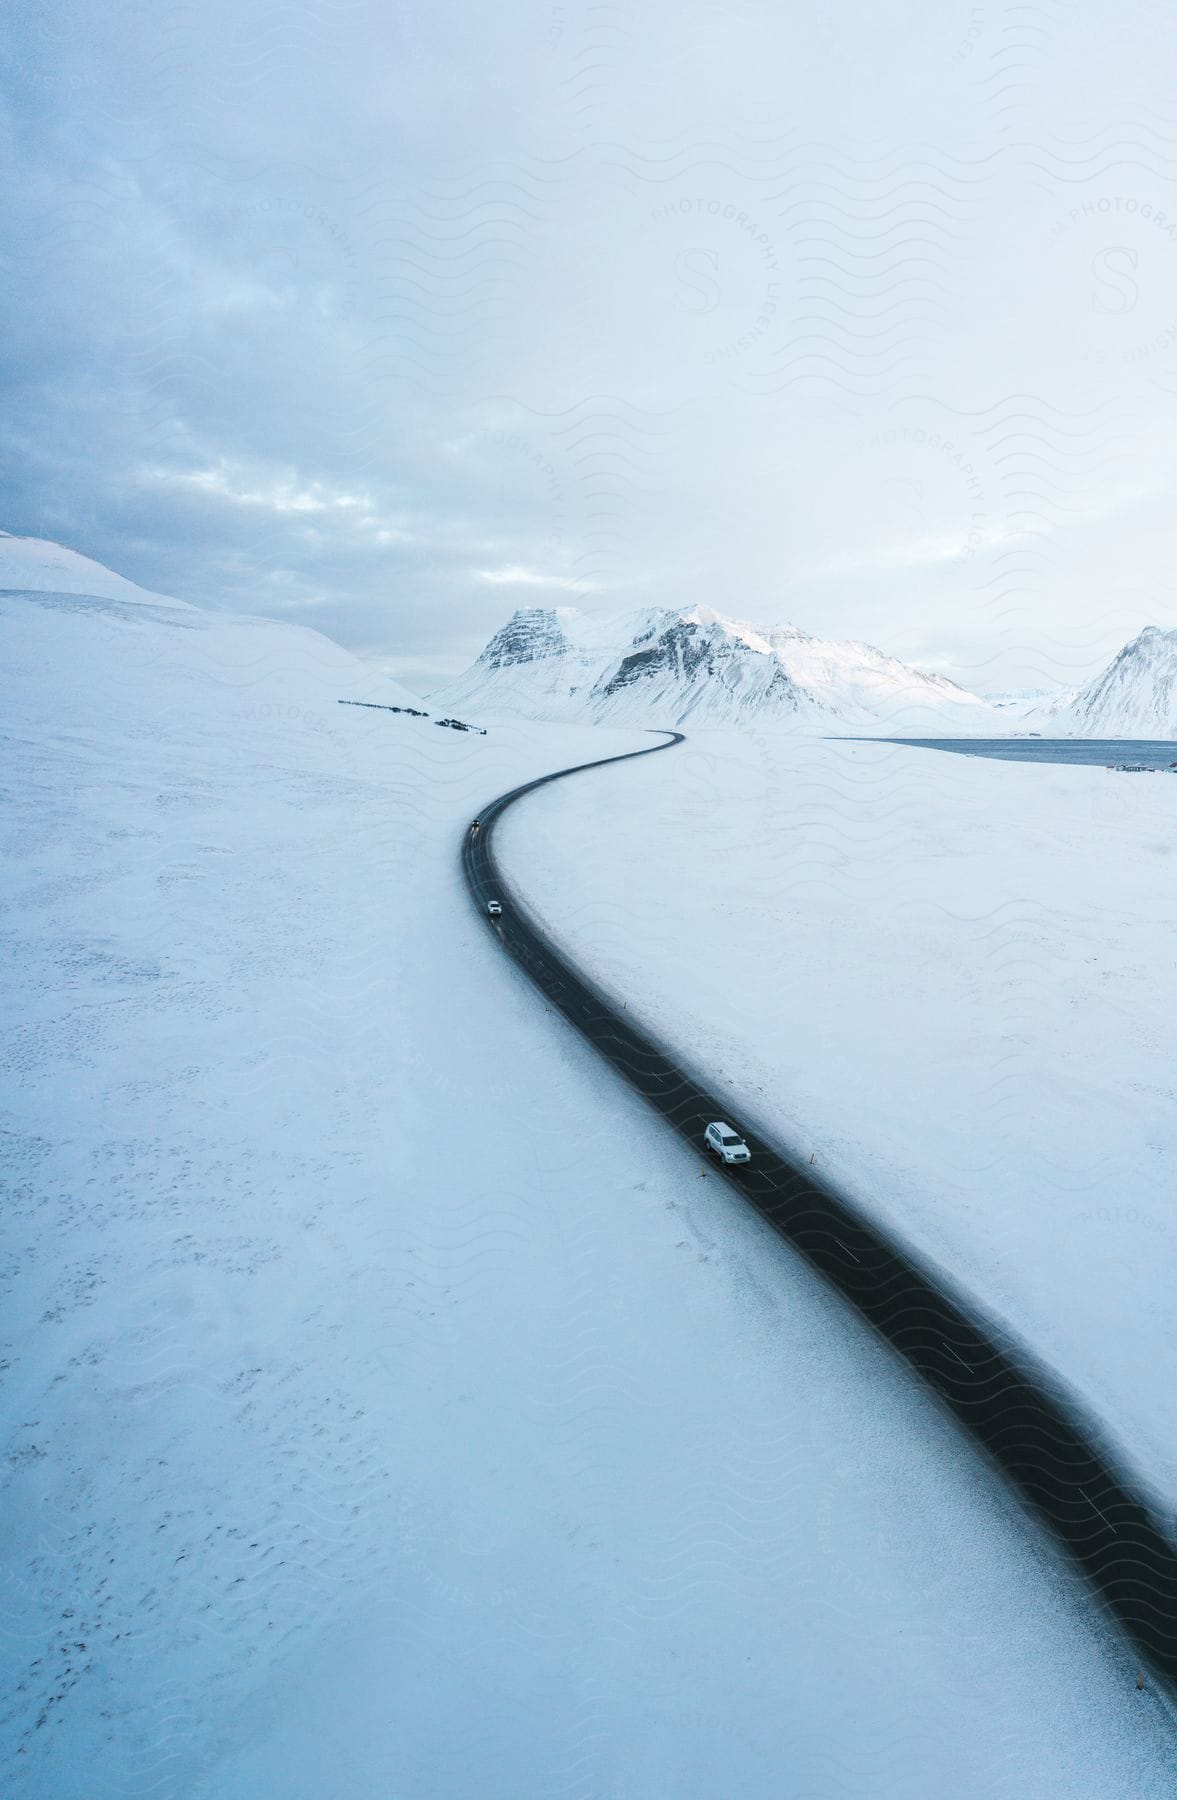 A white SUV snakes through a freshly plowed mountain pass, snow-covered peaks rising in the distance with snow covering the ground.